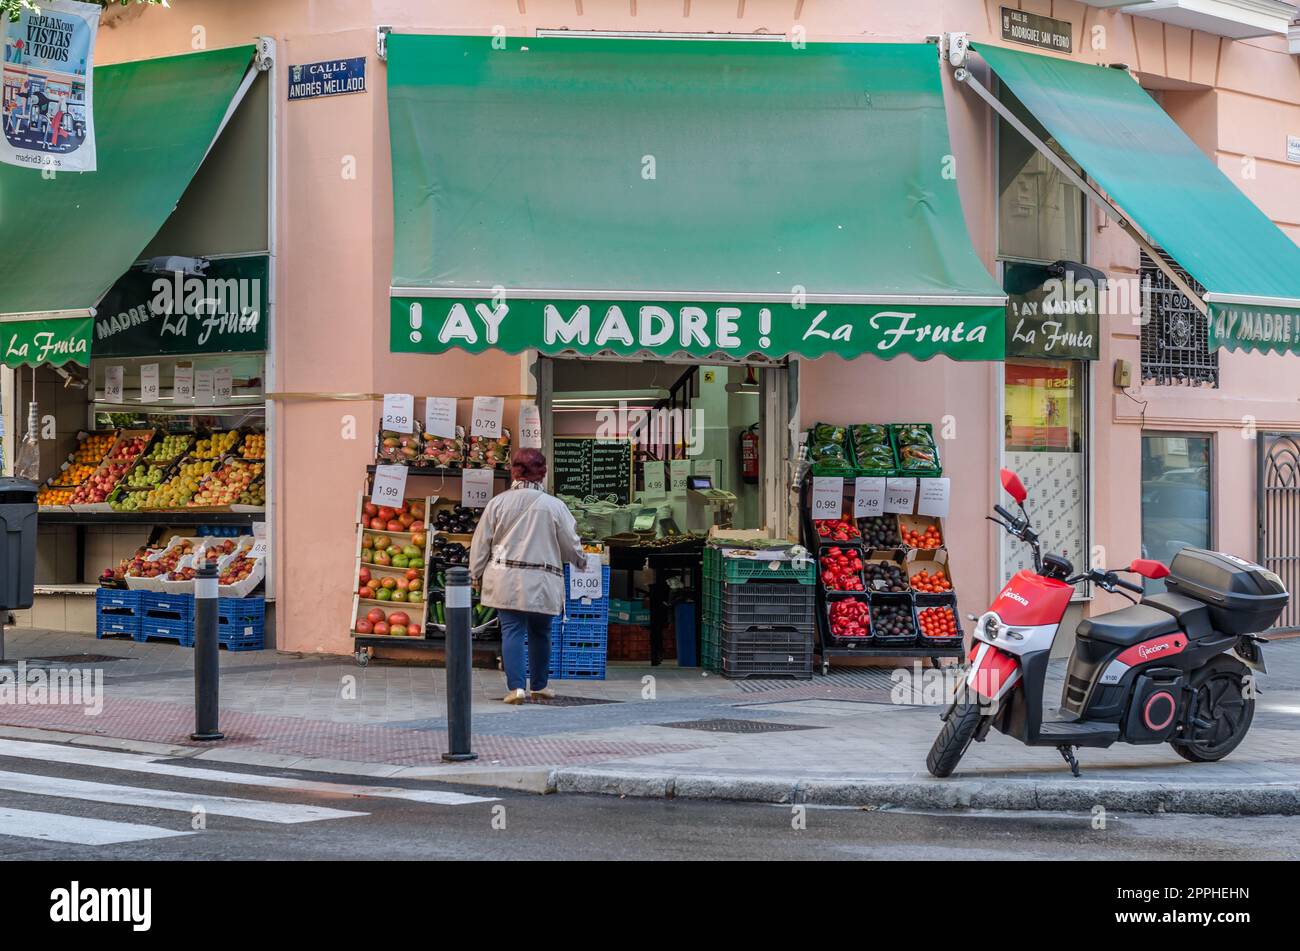 MADRID, SPAIN - OCTOBER 5, 2021: Fruit store of the 'Ay Madre La Fruta' chain in Madrid, Spain Stock Photo